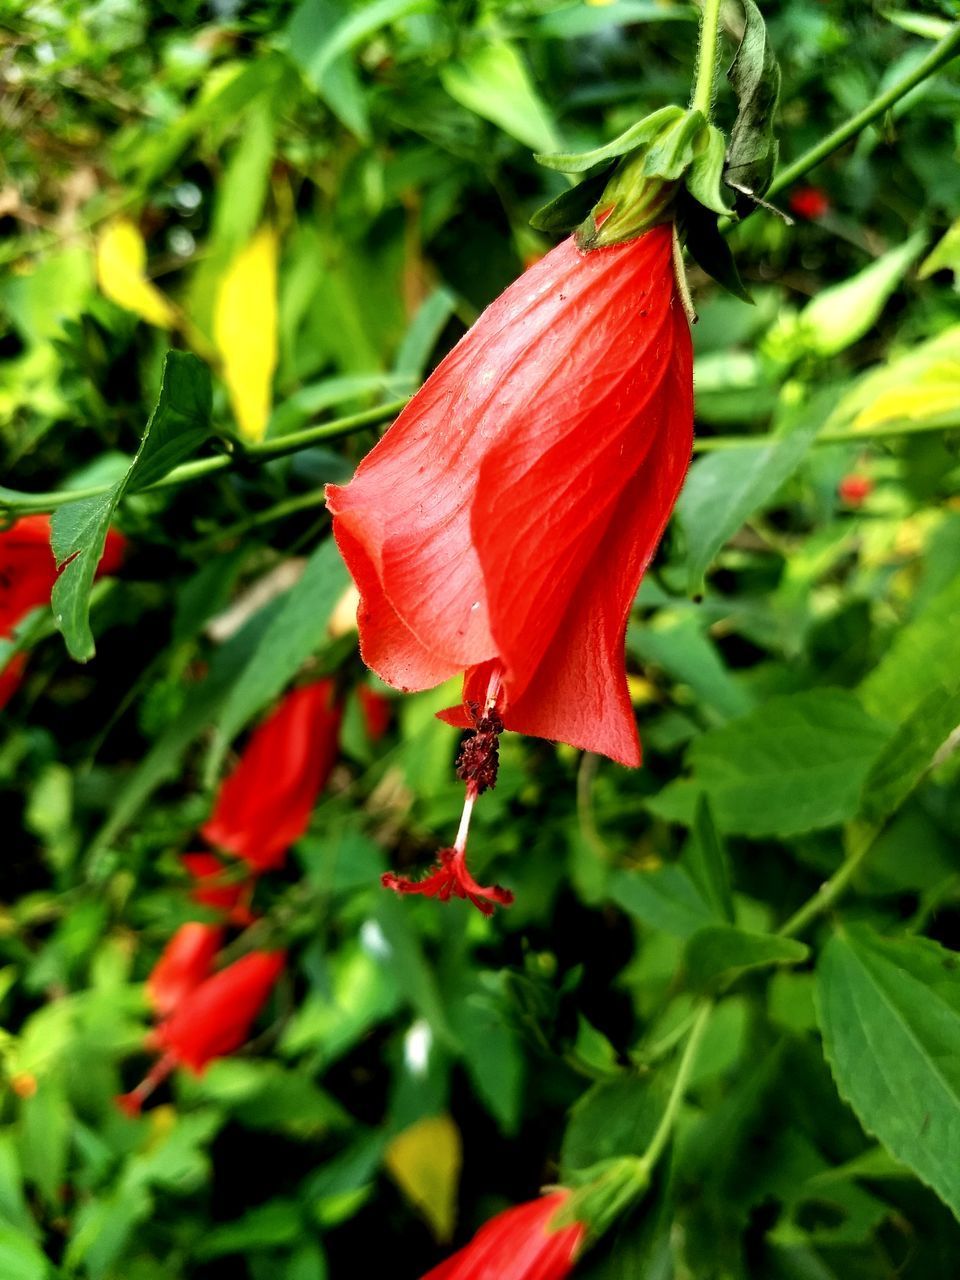 CLOSE-UP OF RED FLOWER ON PLANT